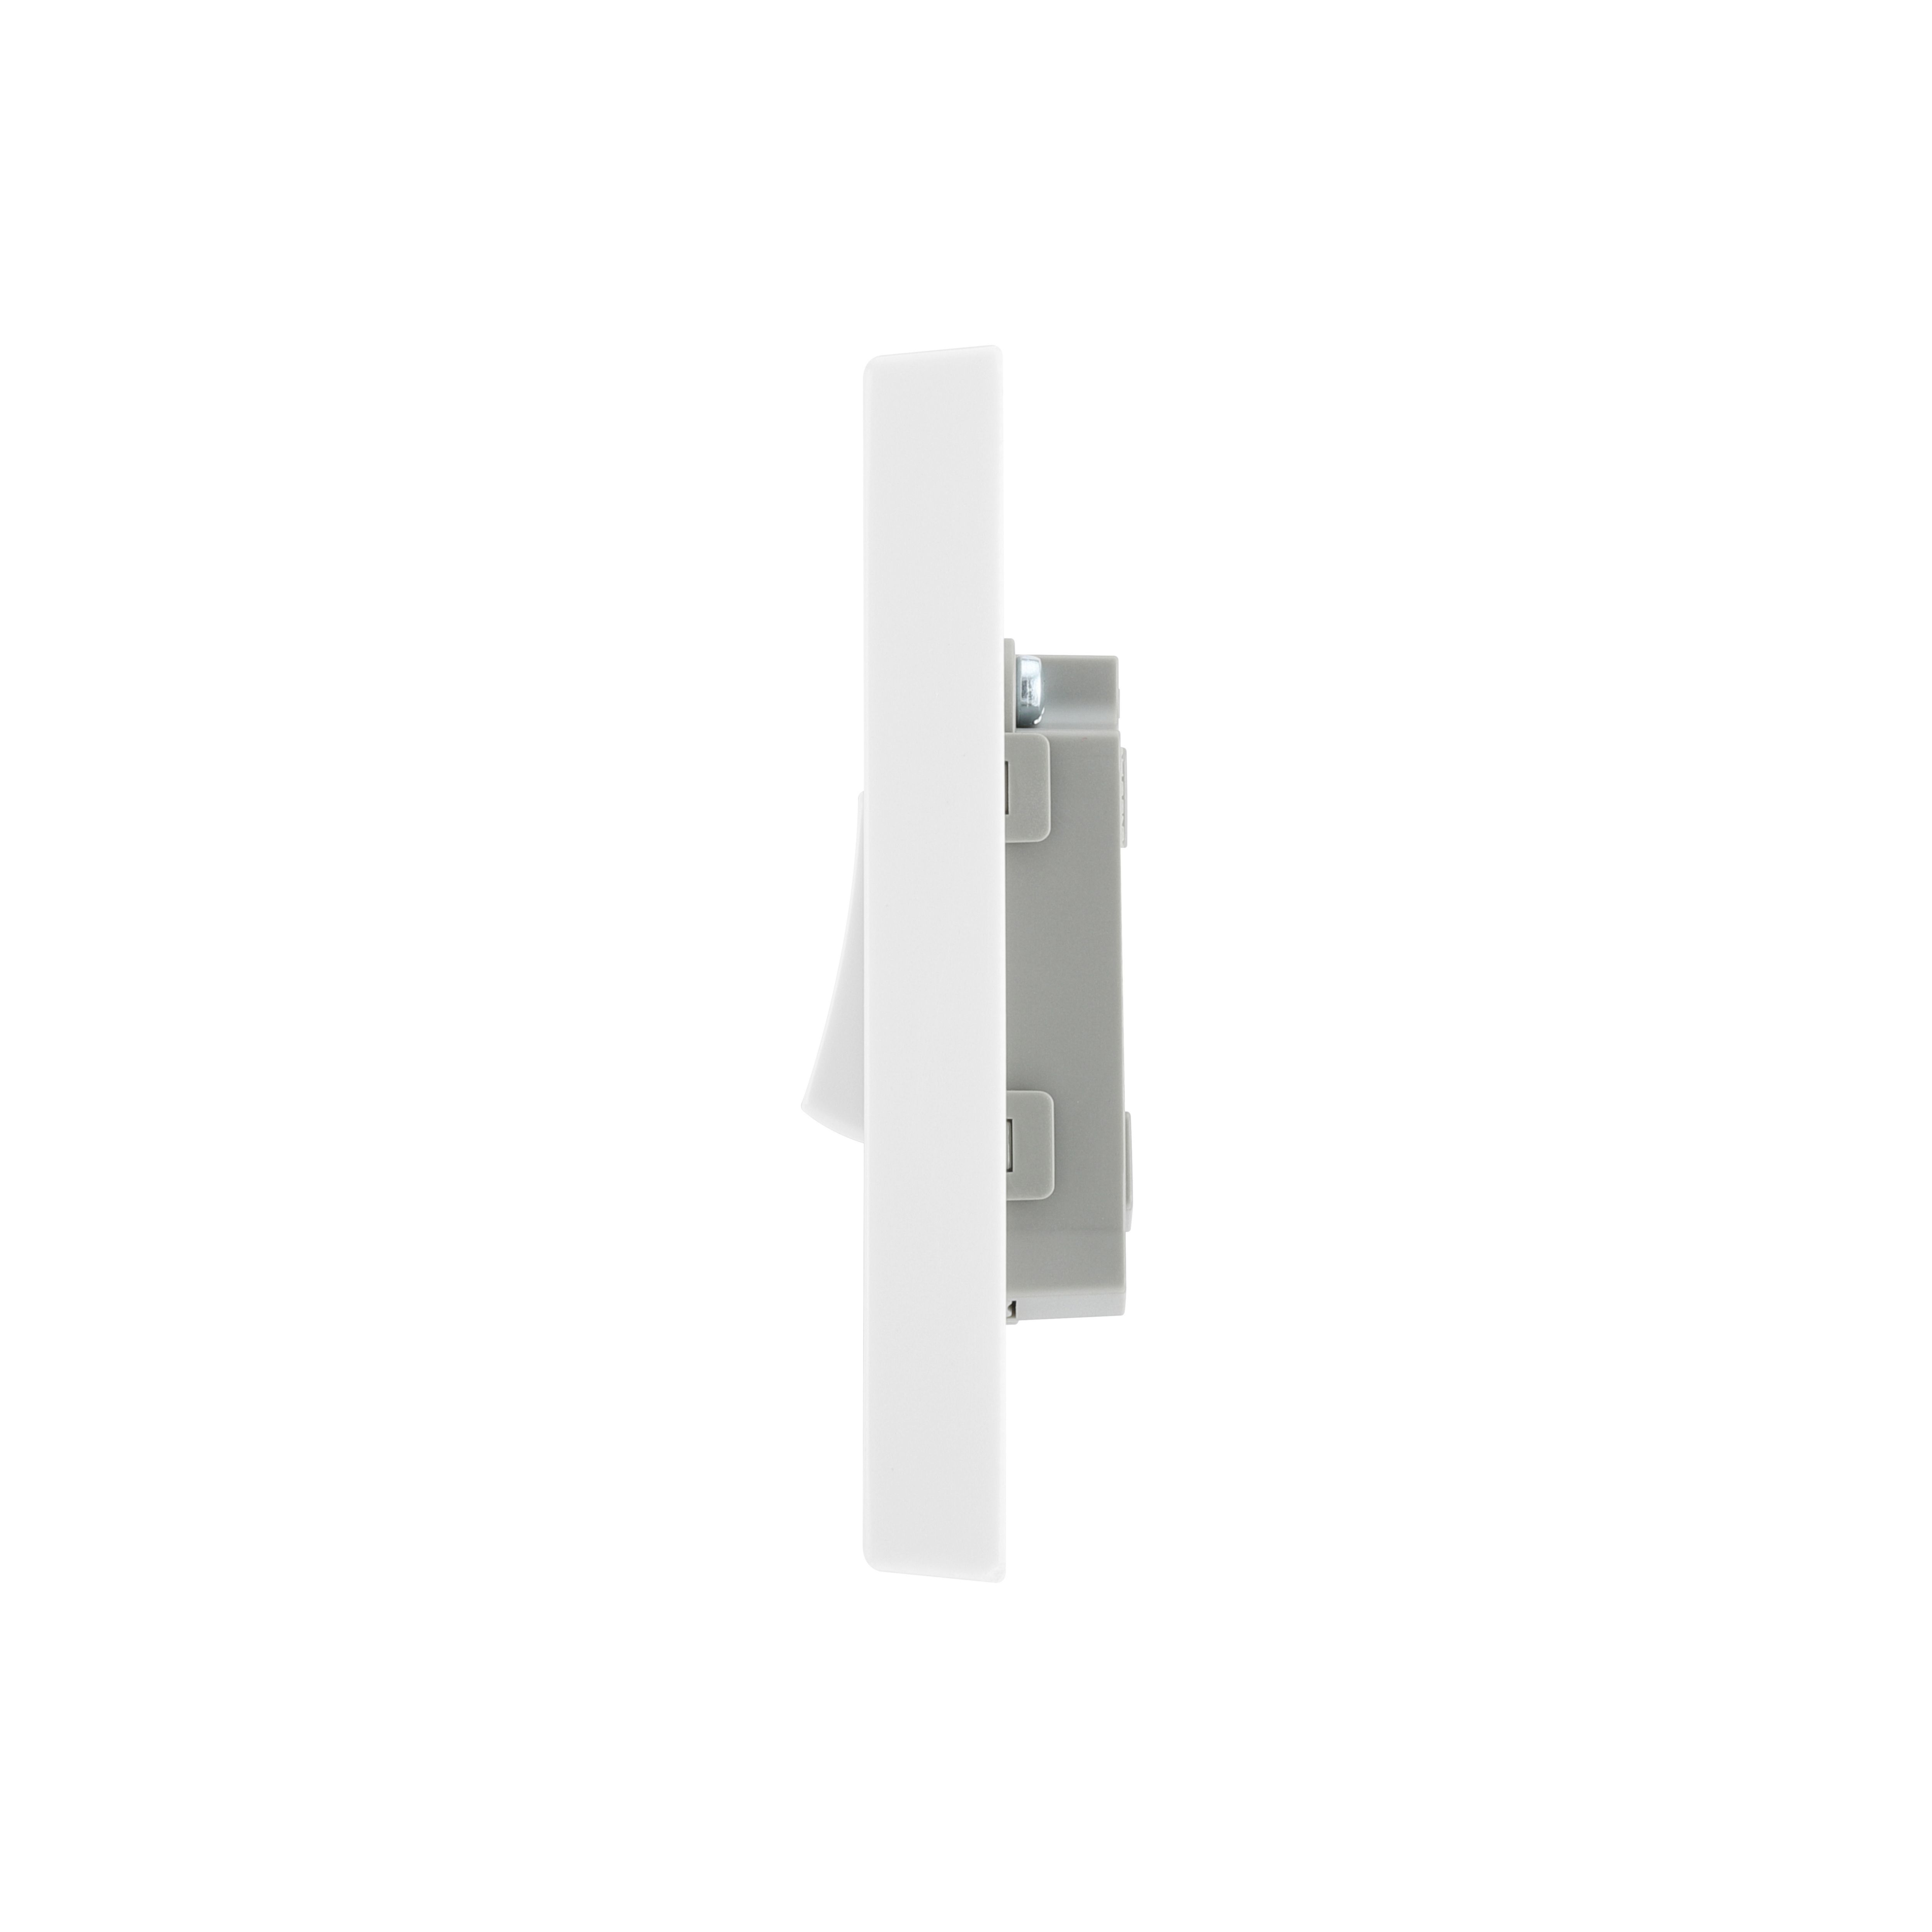 BG White 20A 1 way 1 gang Light Switch, Pack of 5